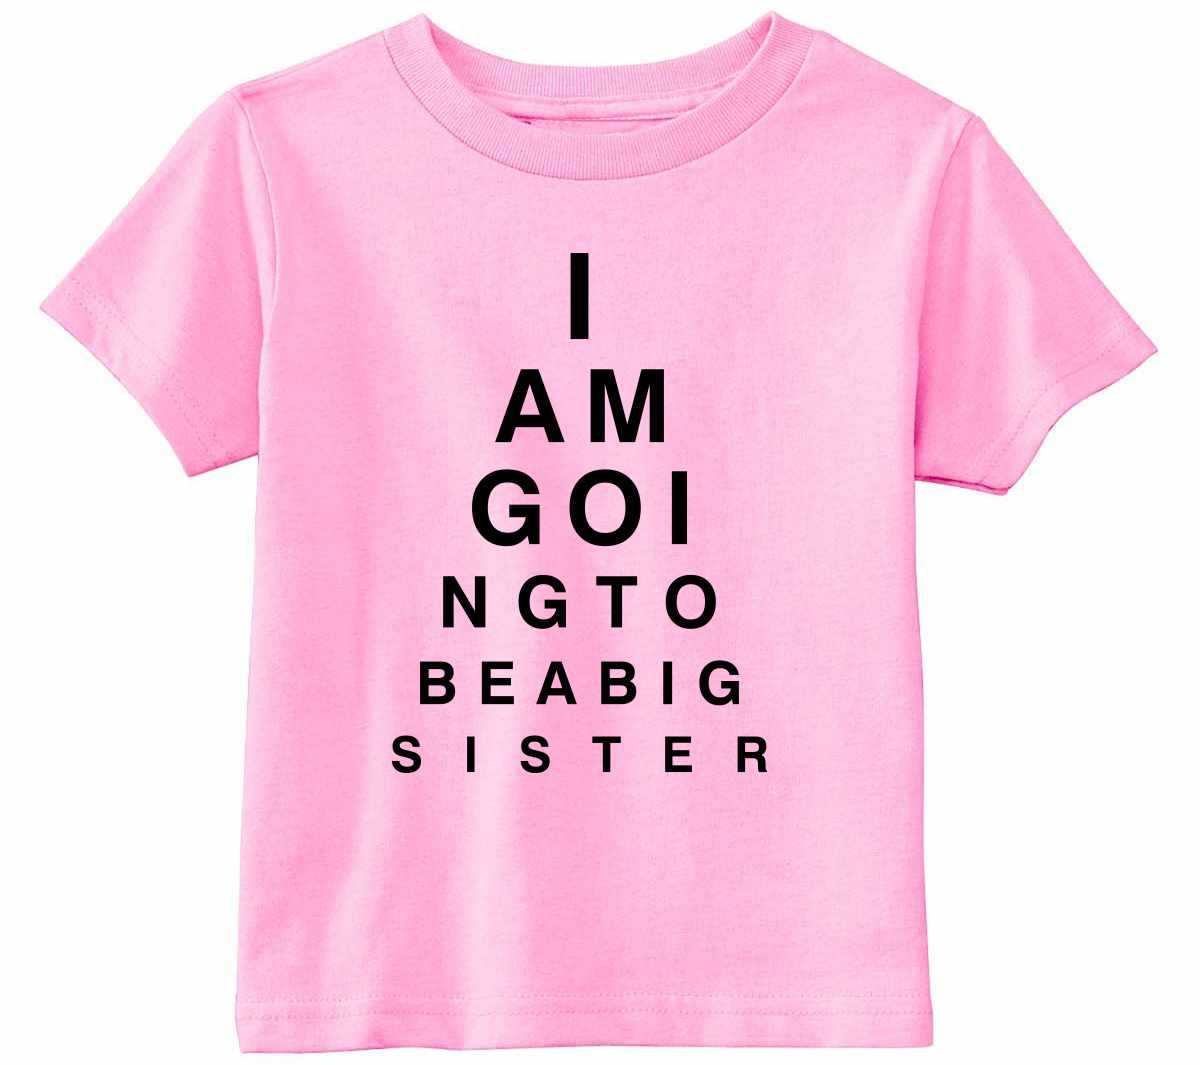 I AM GOING TO BE BIG SISTER EYE CHART Infant/Toddler 